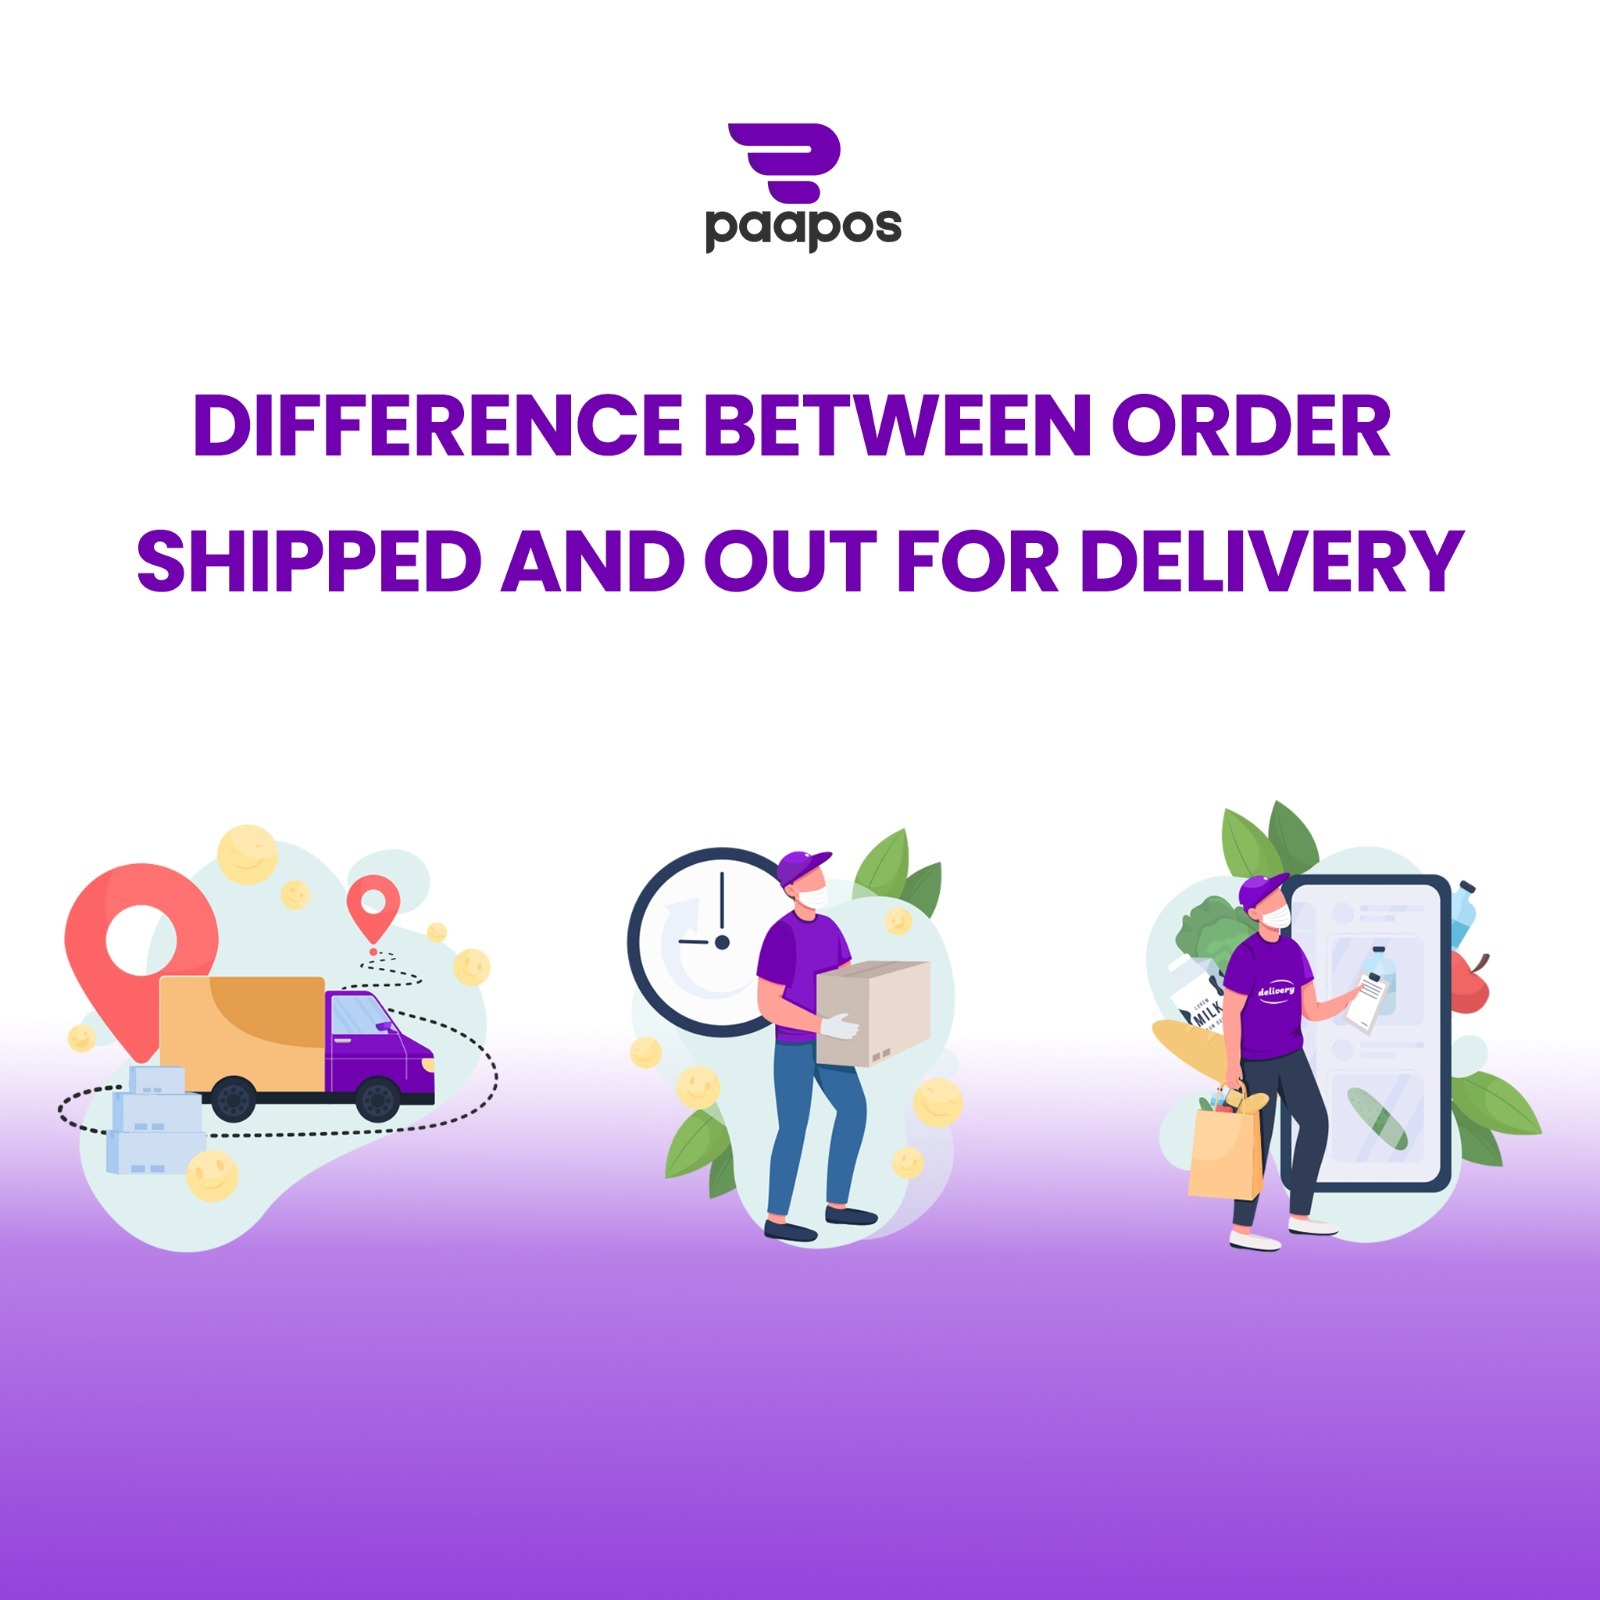 Difference between "order shipped" and "out for delivery"